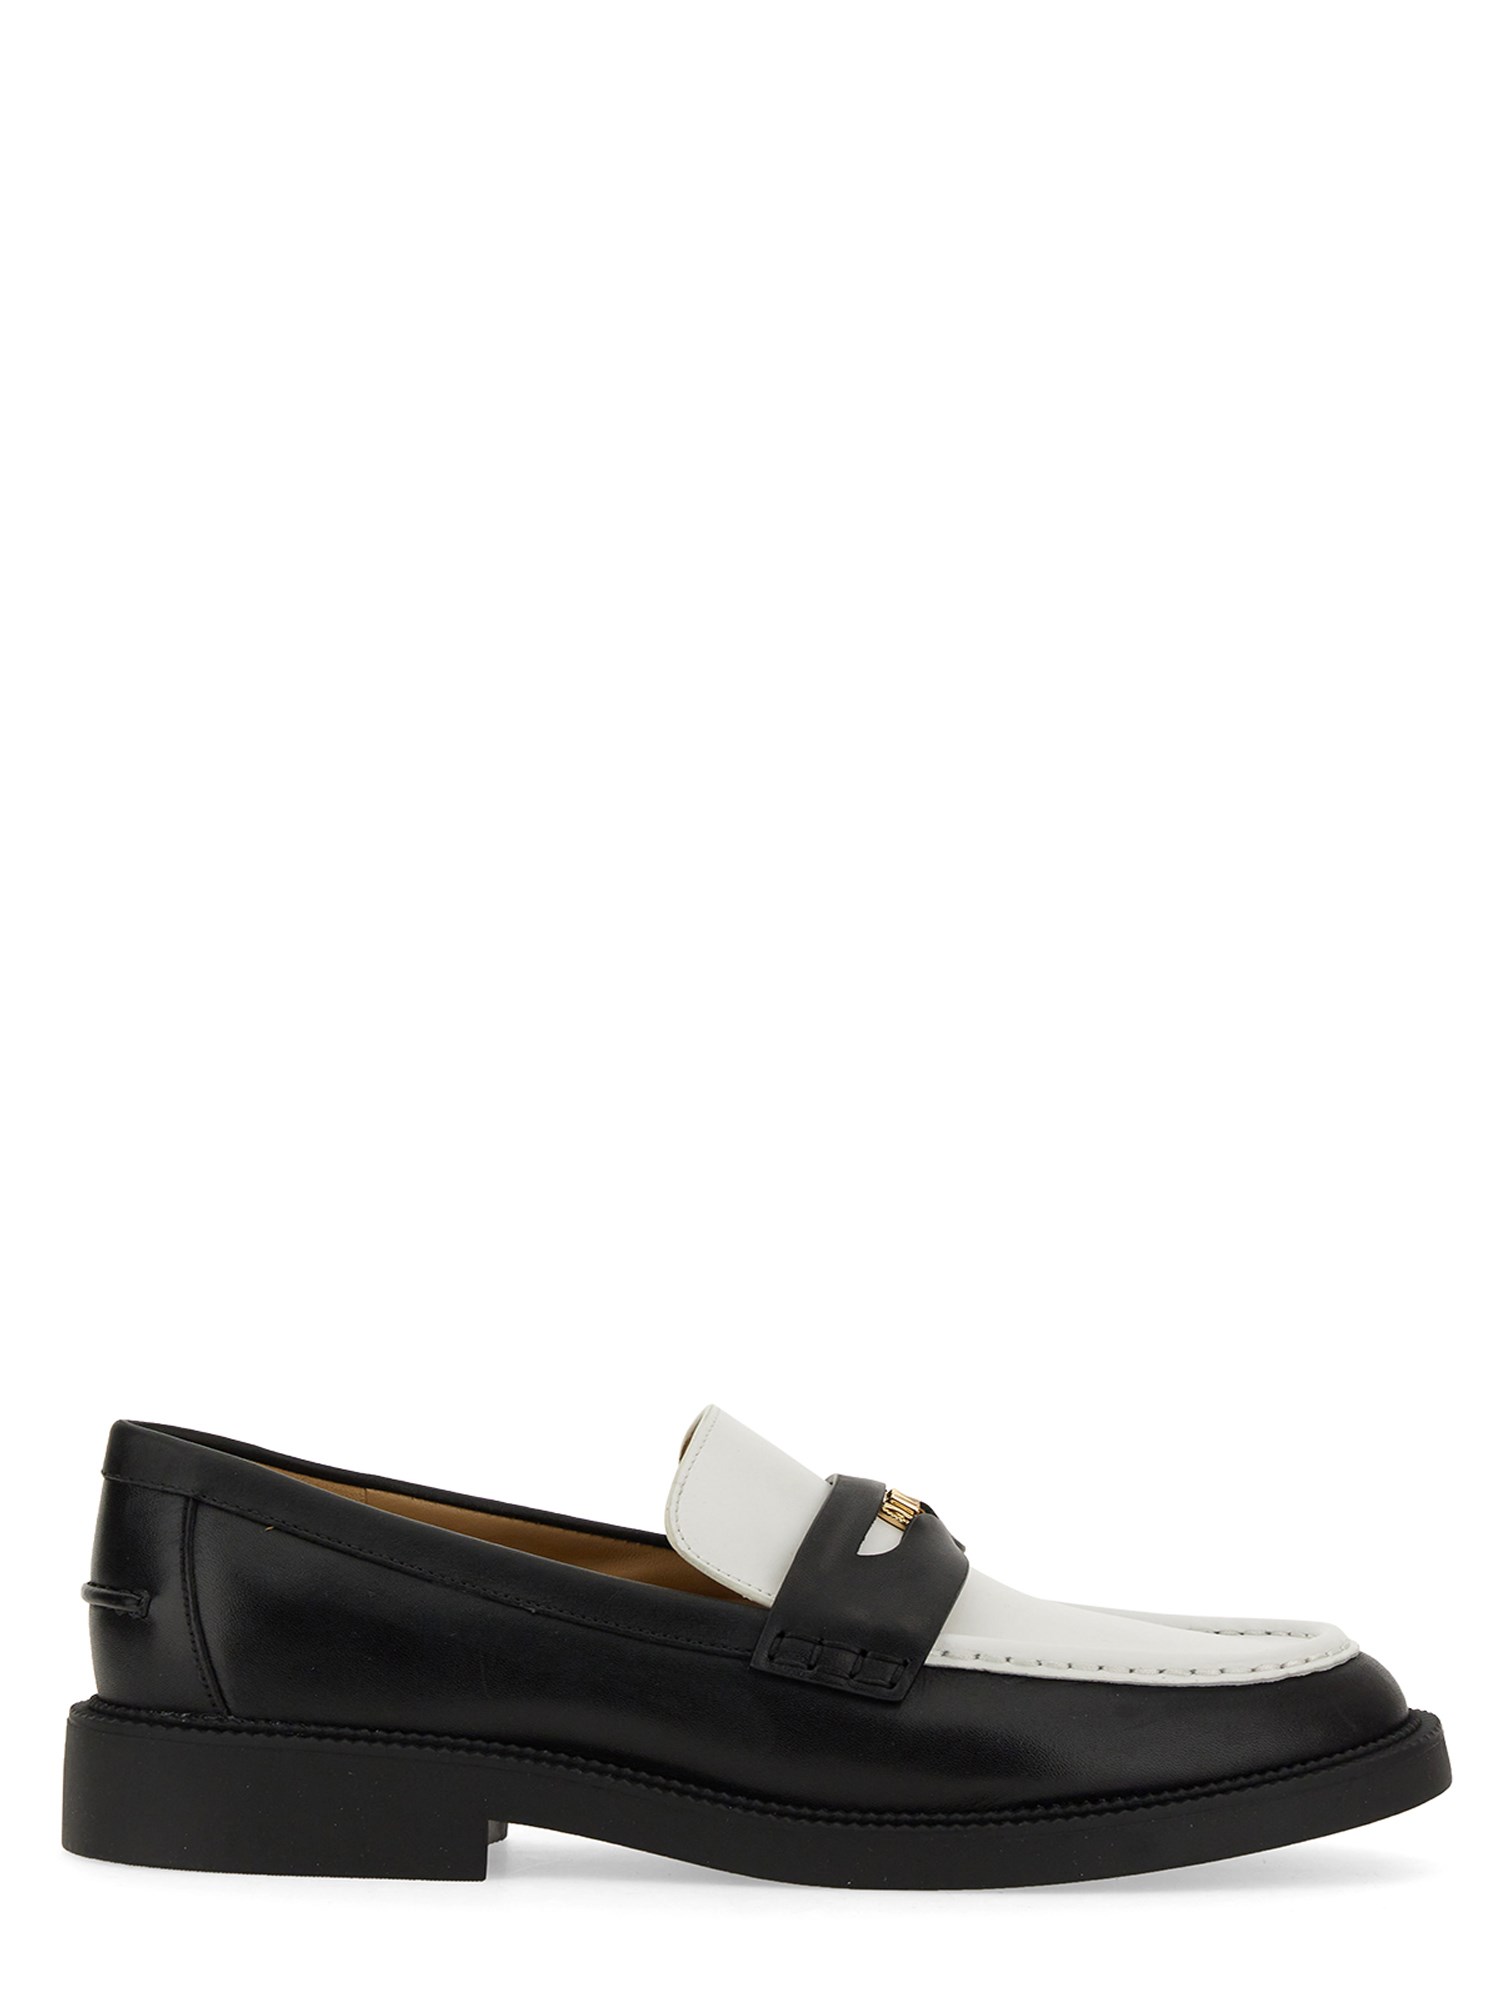 michael by michael kors loafer with coin